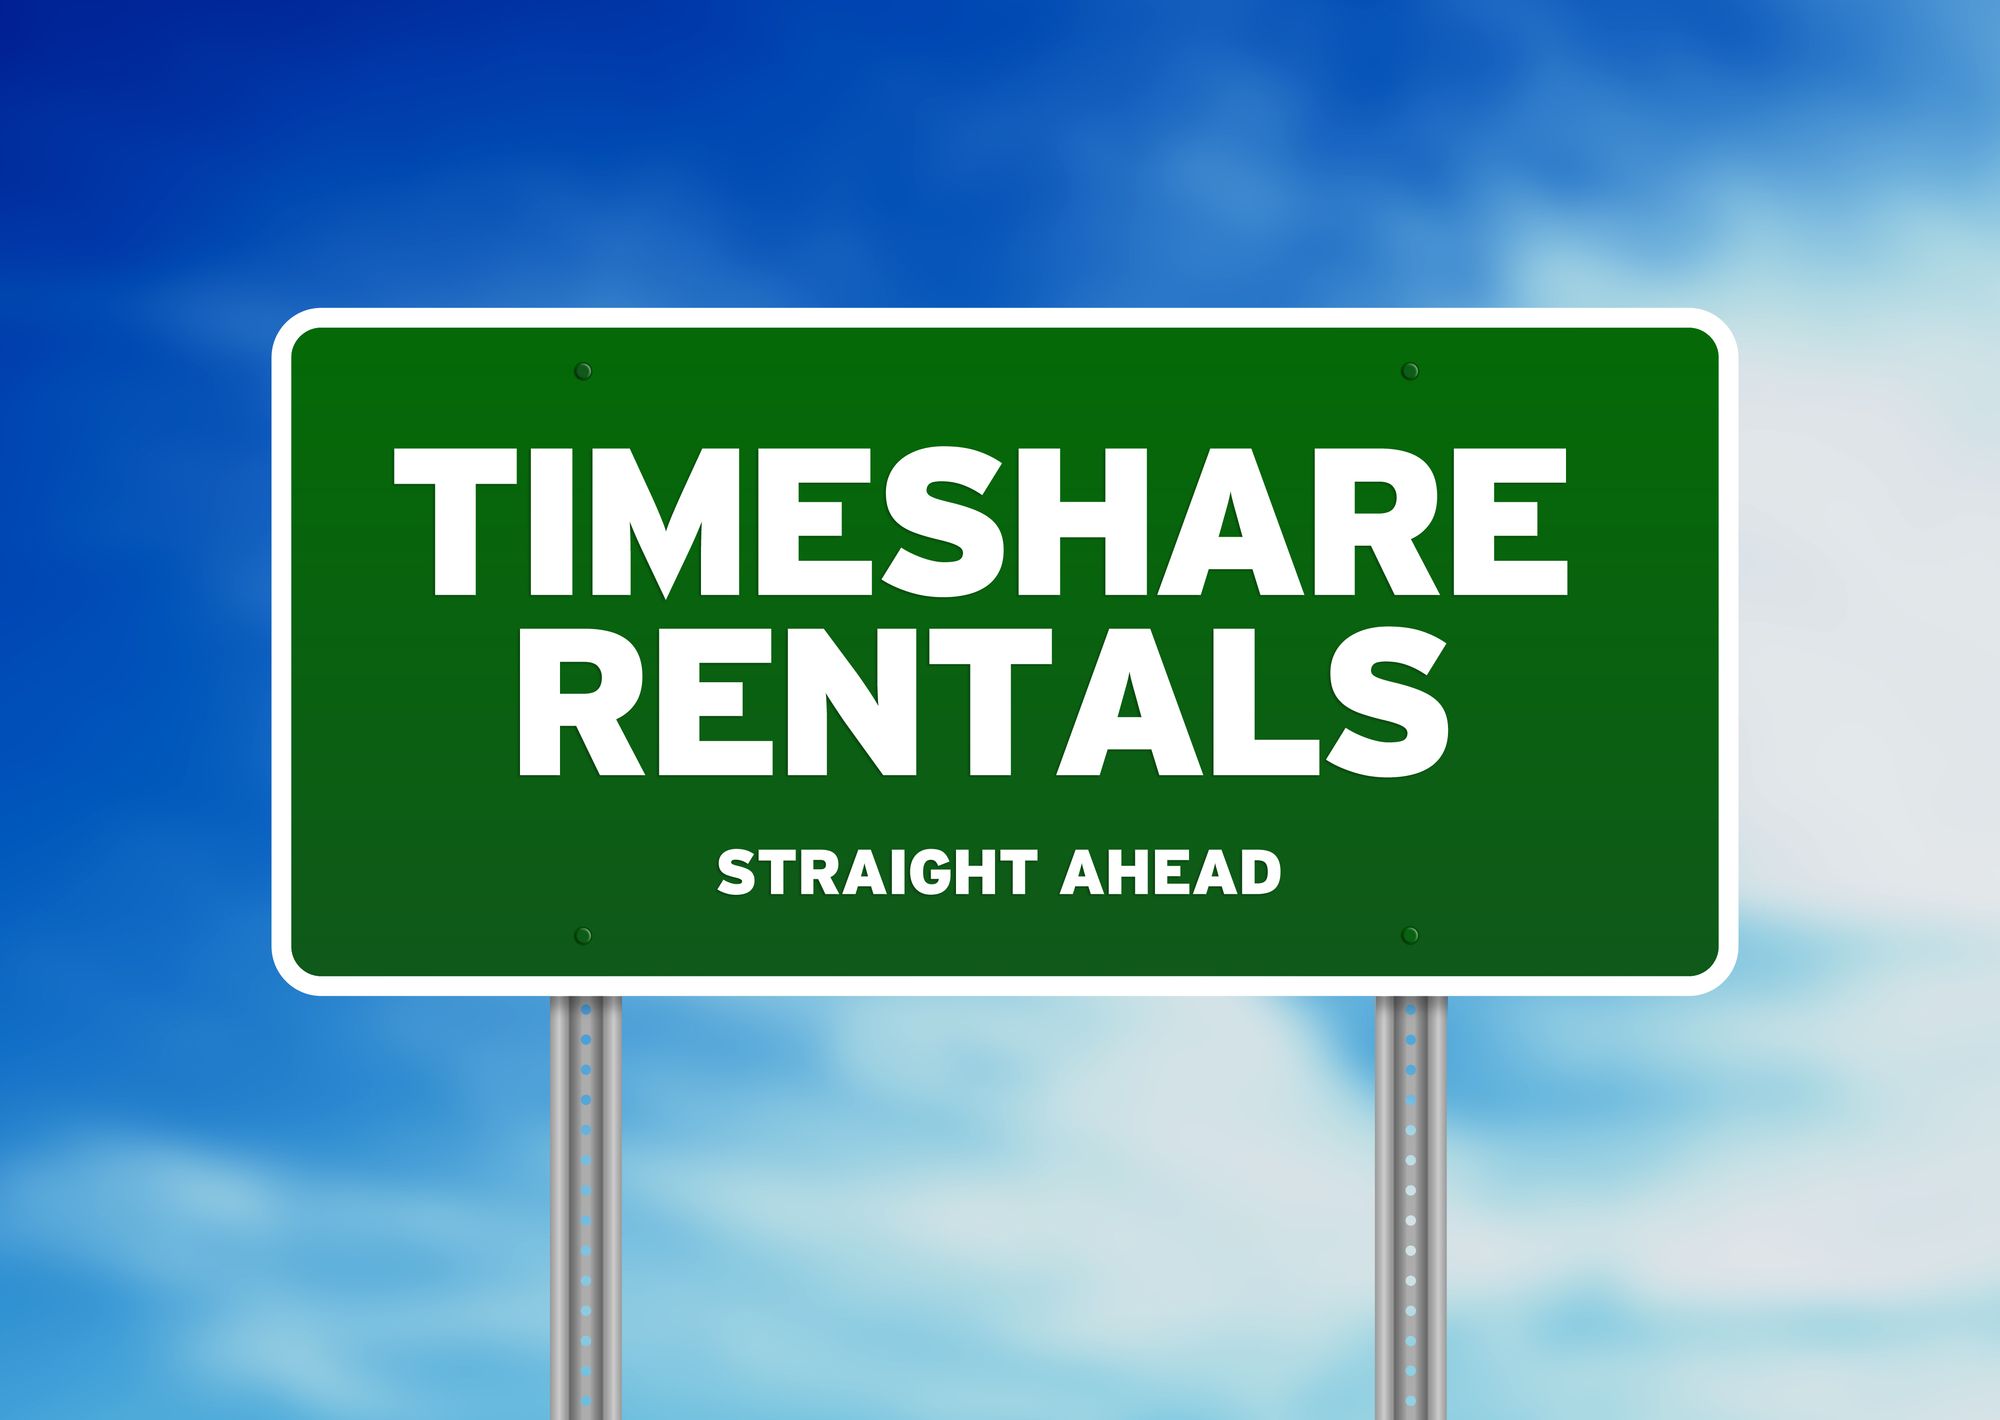 Green Timeshare Rentals highway sign on Cloud Background.